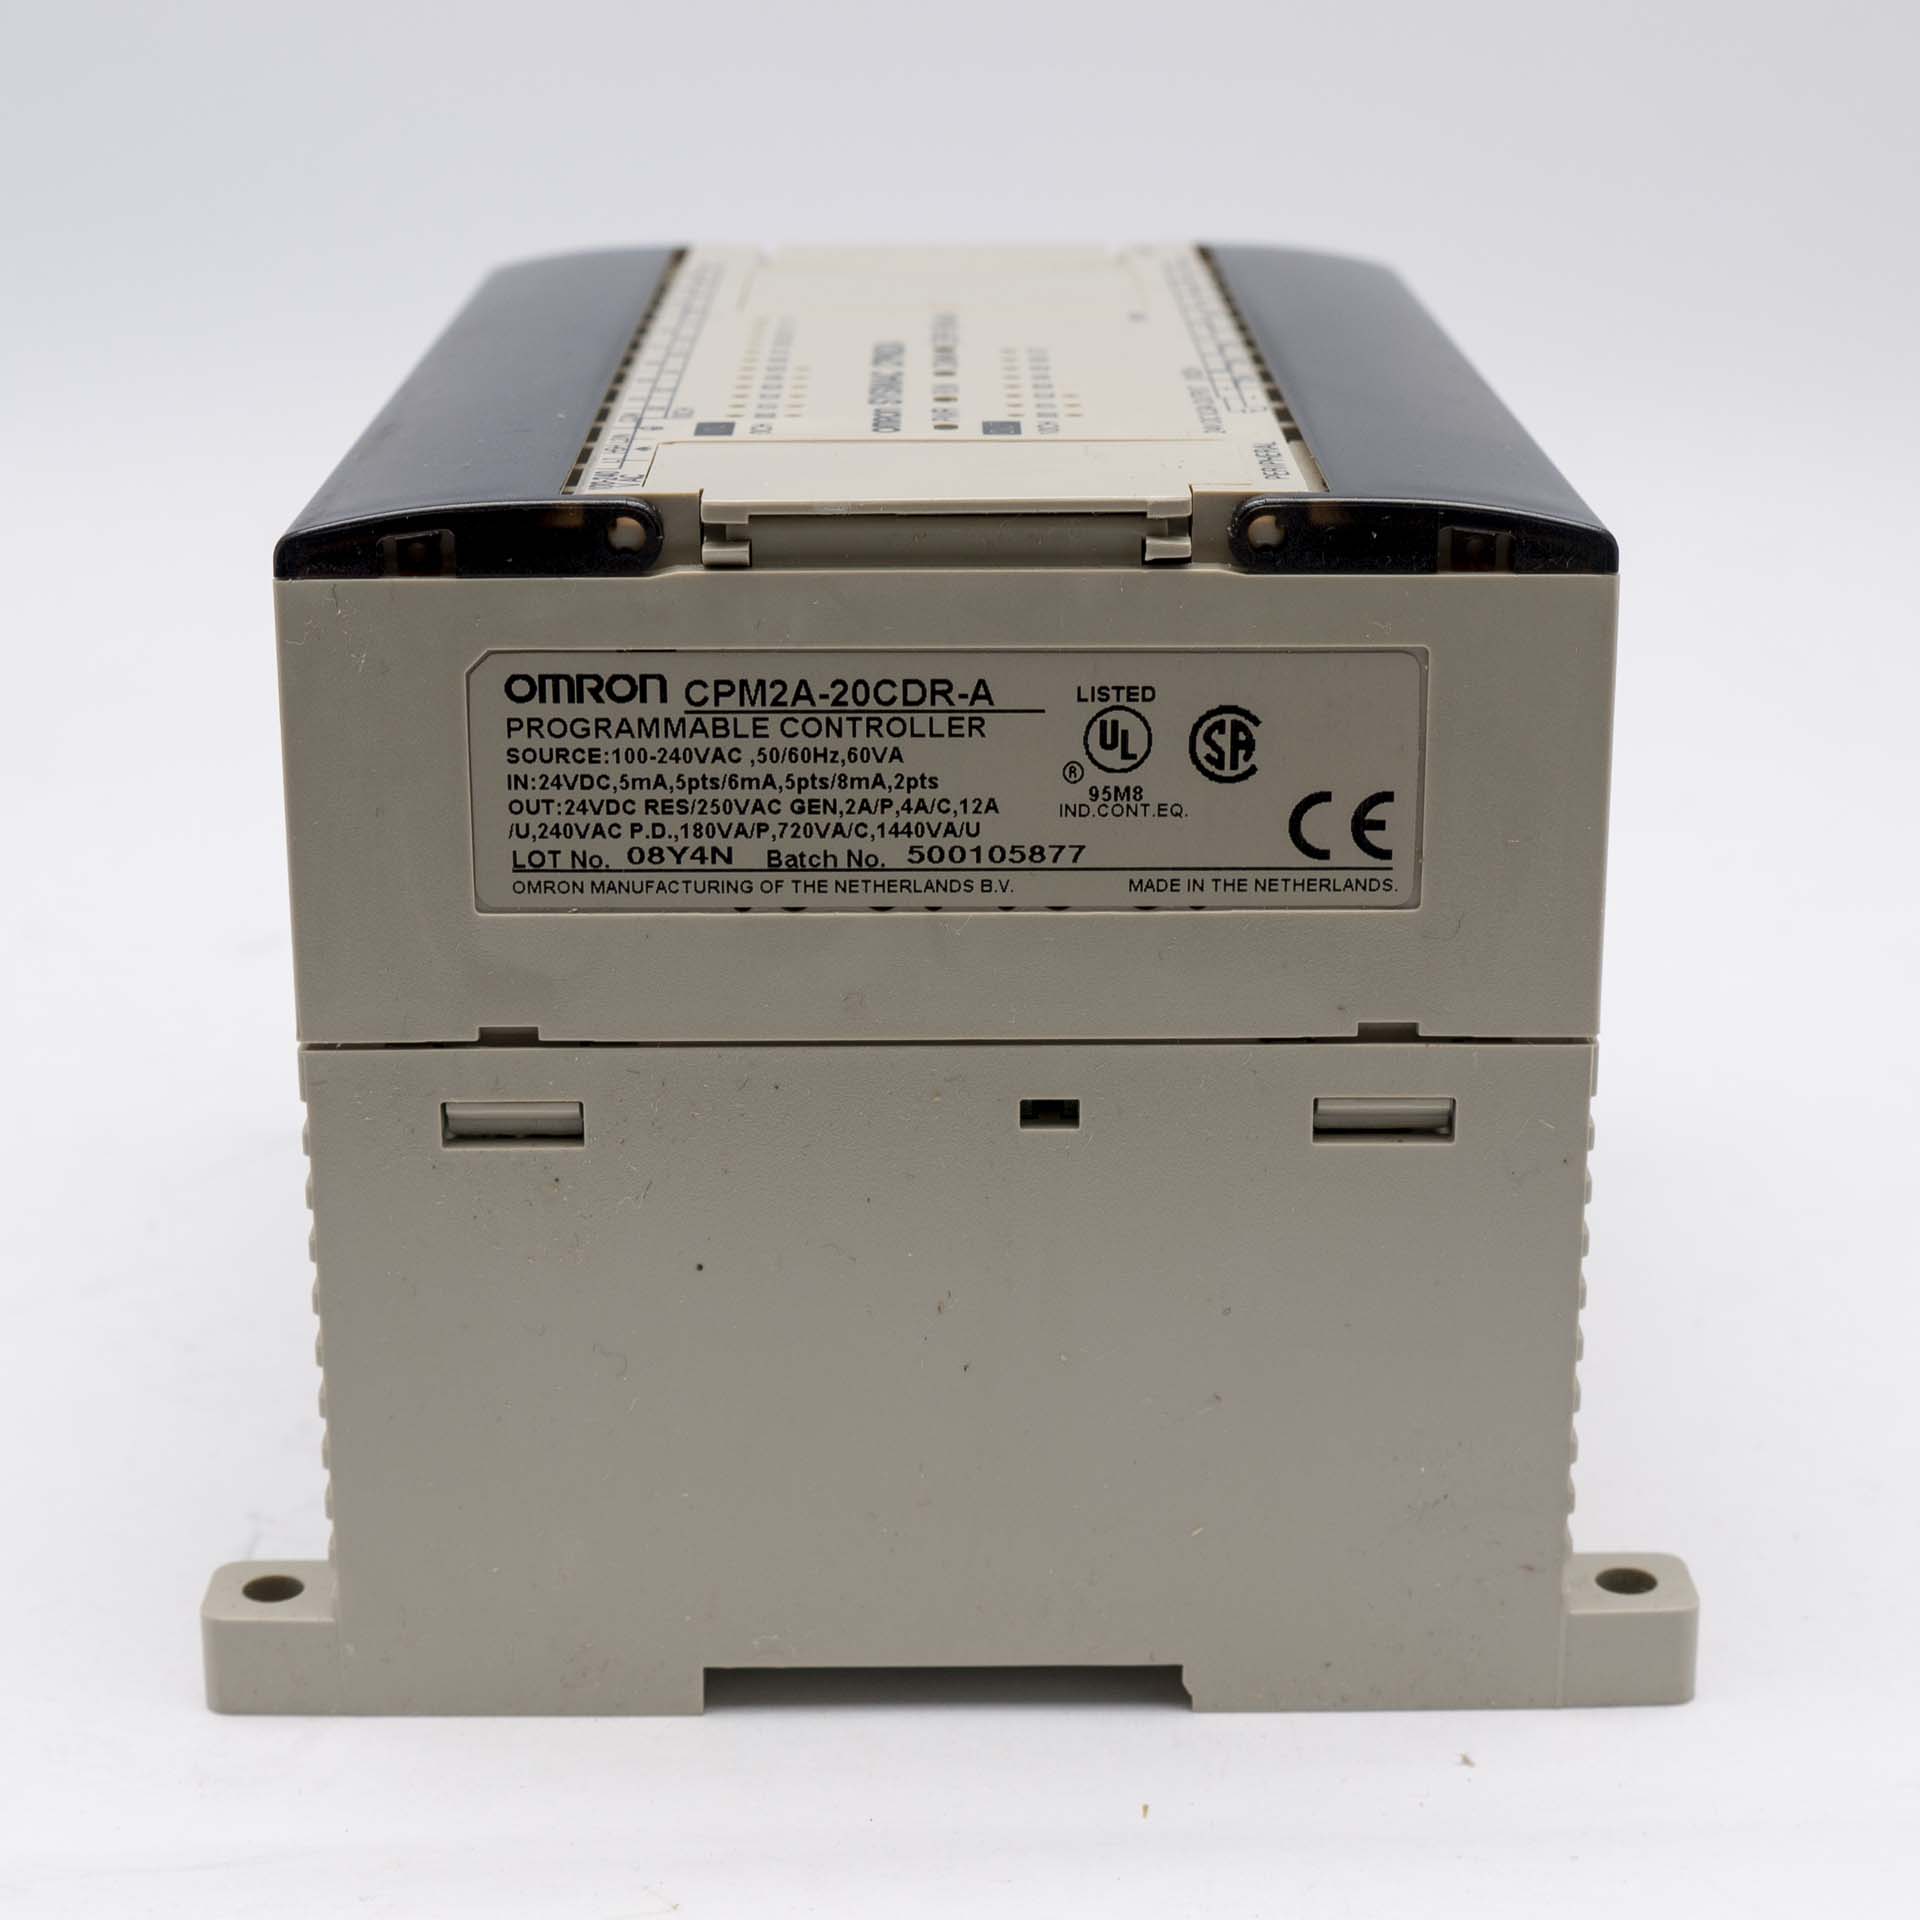 Omron CPM2A-20CDR-A